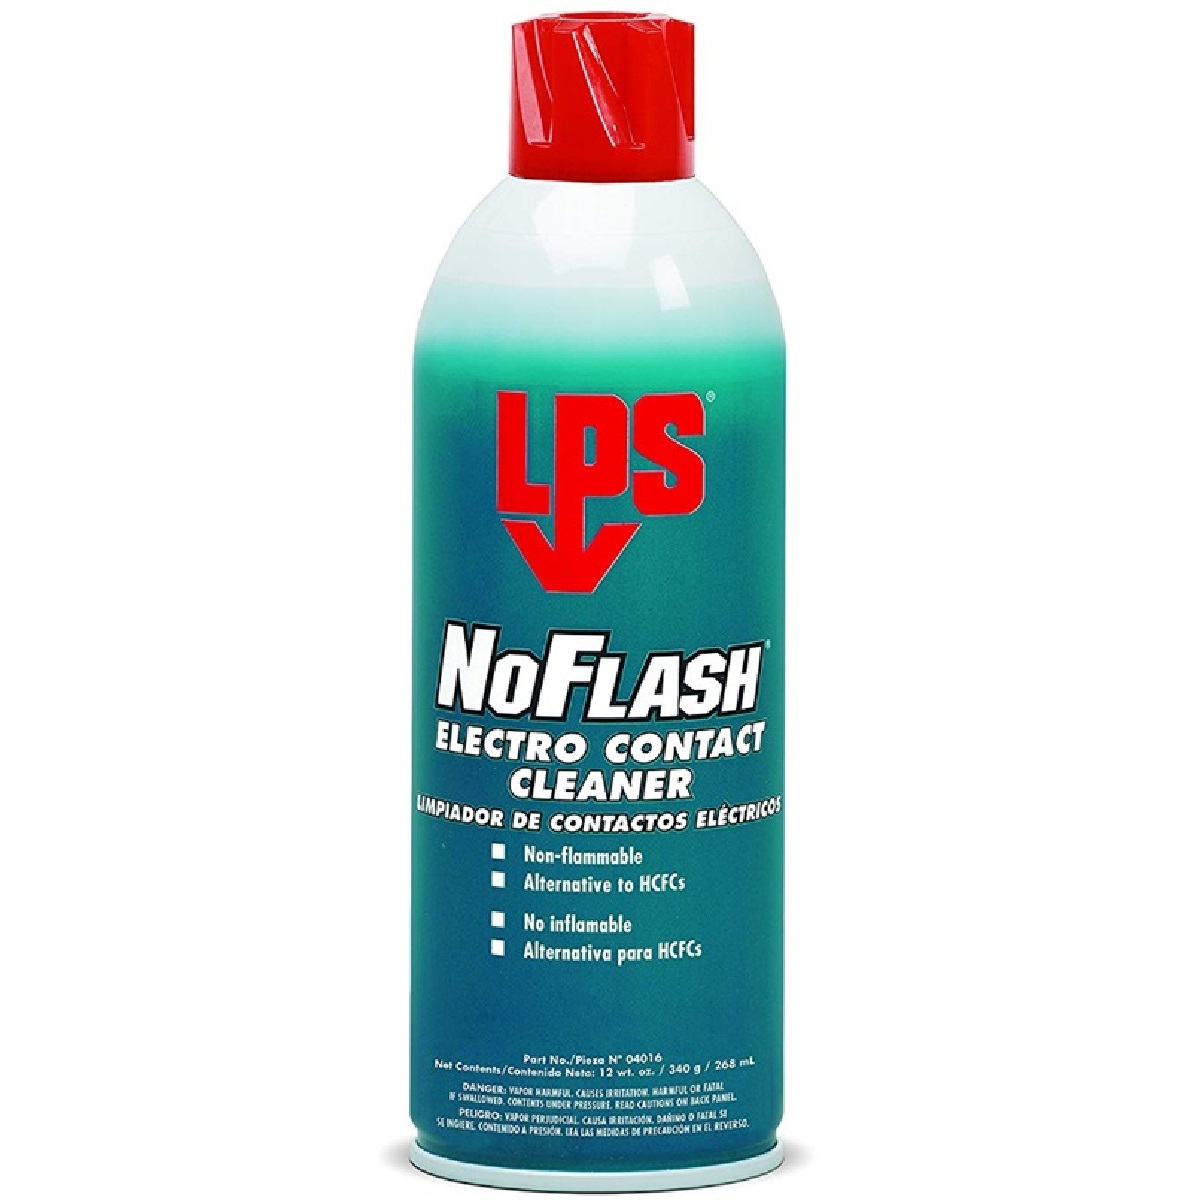 LPS NOFLASH Non-Flammable Electro Contact Cleaner 12oz